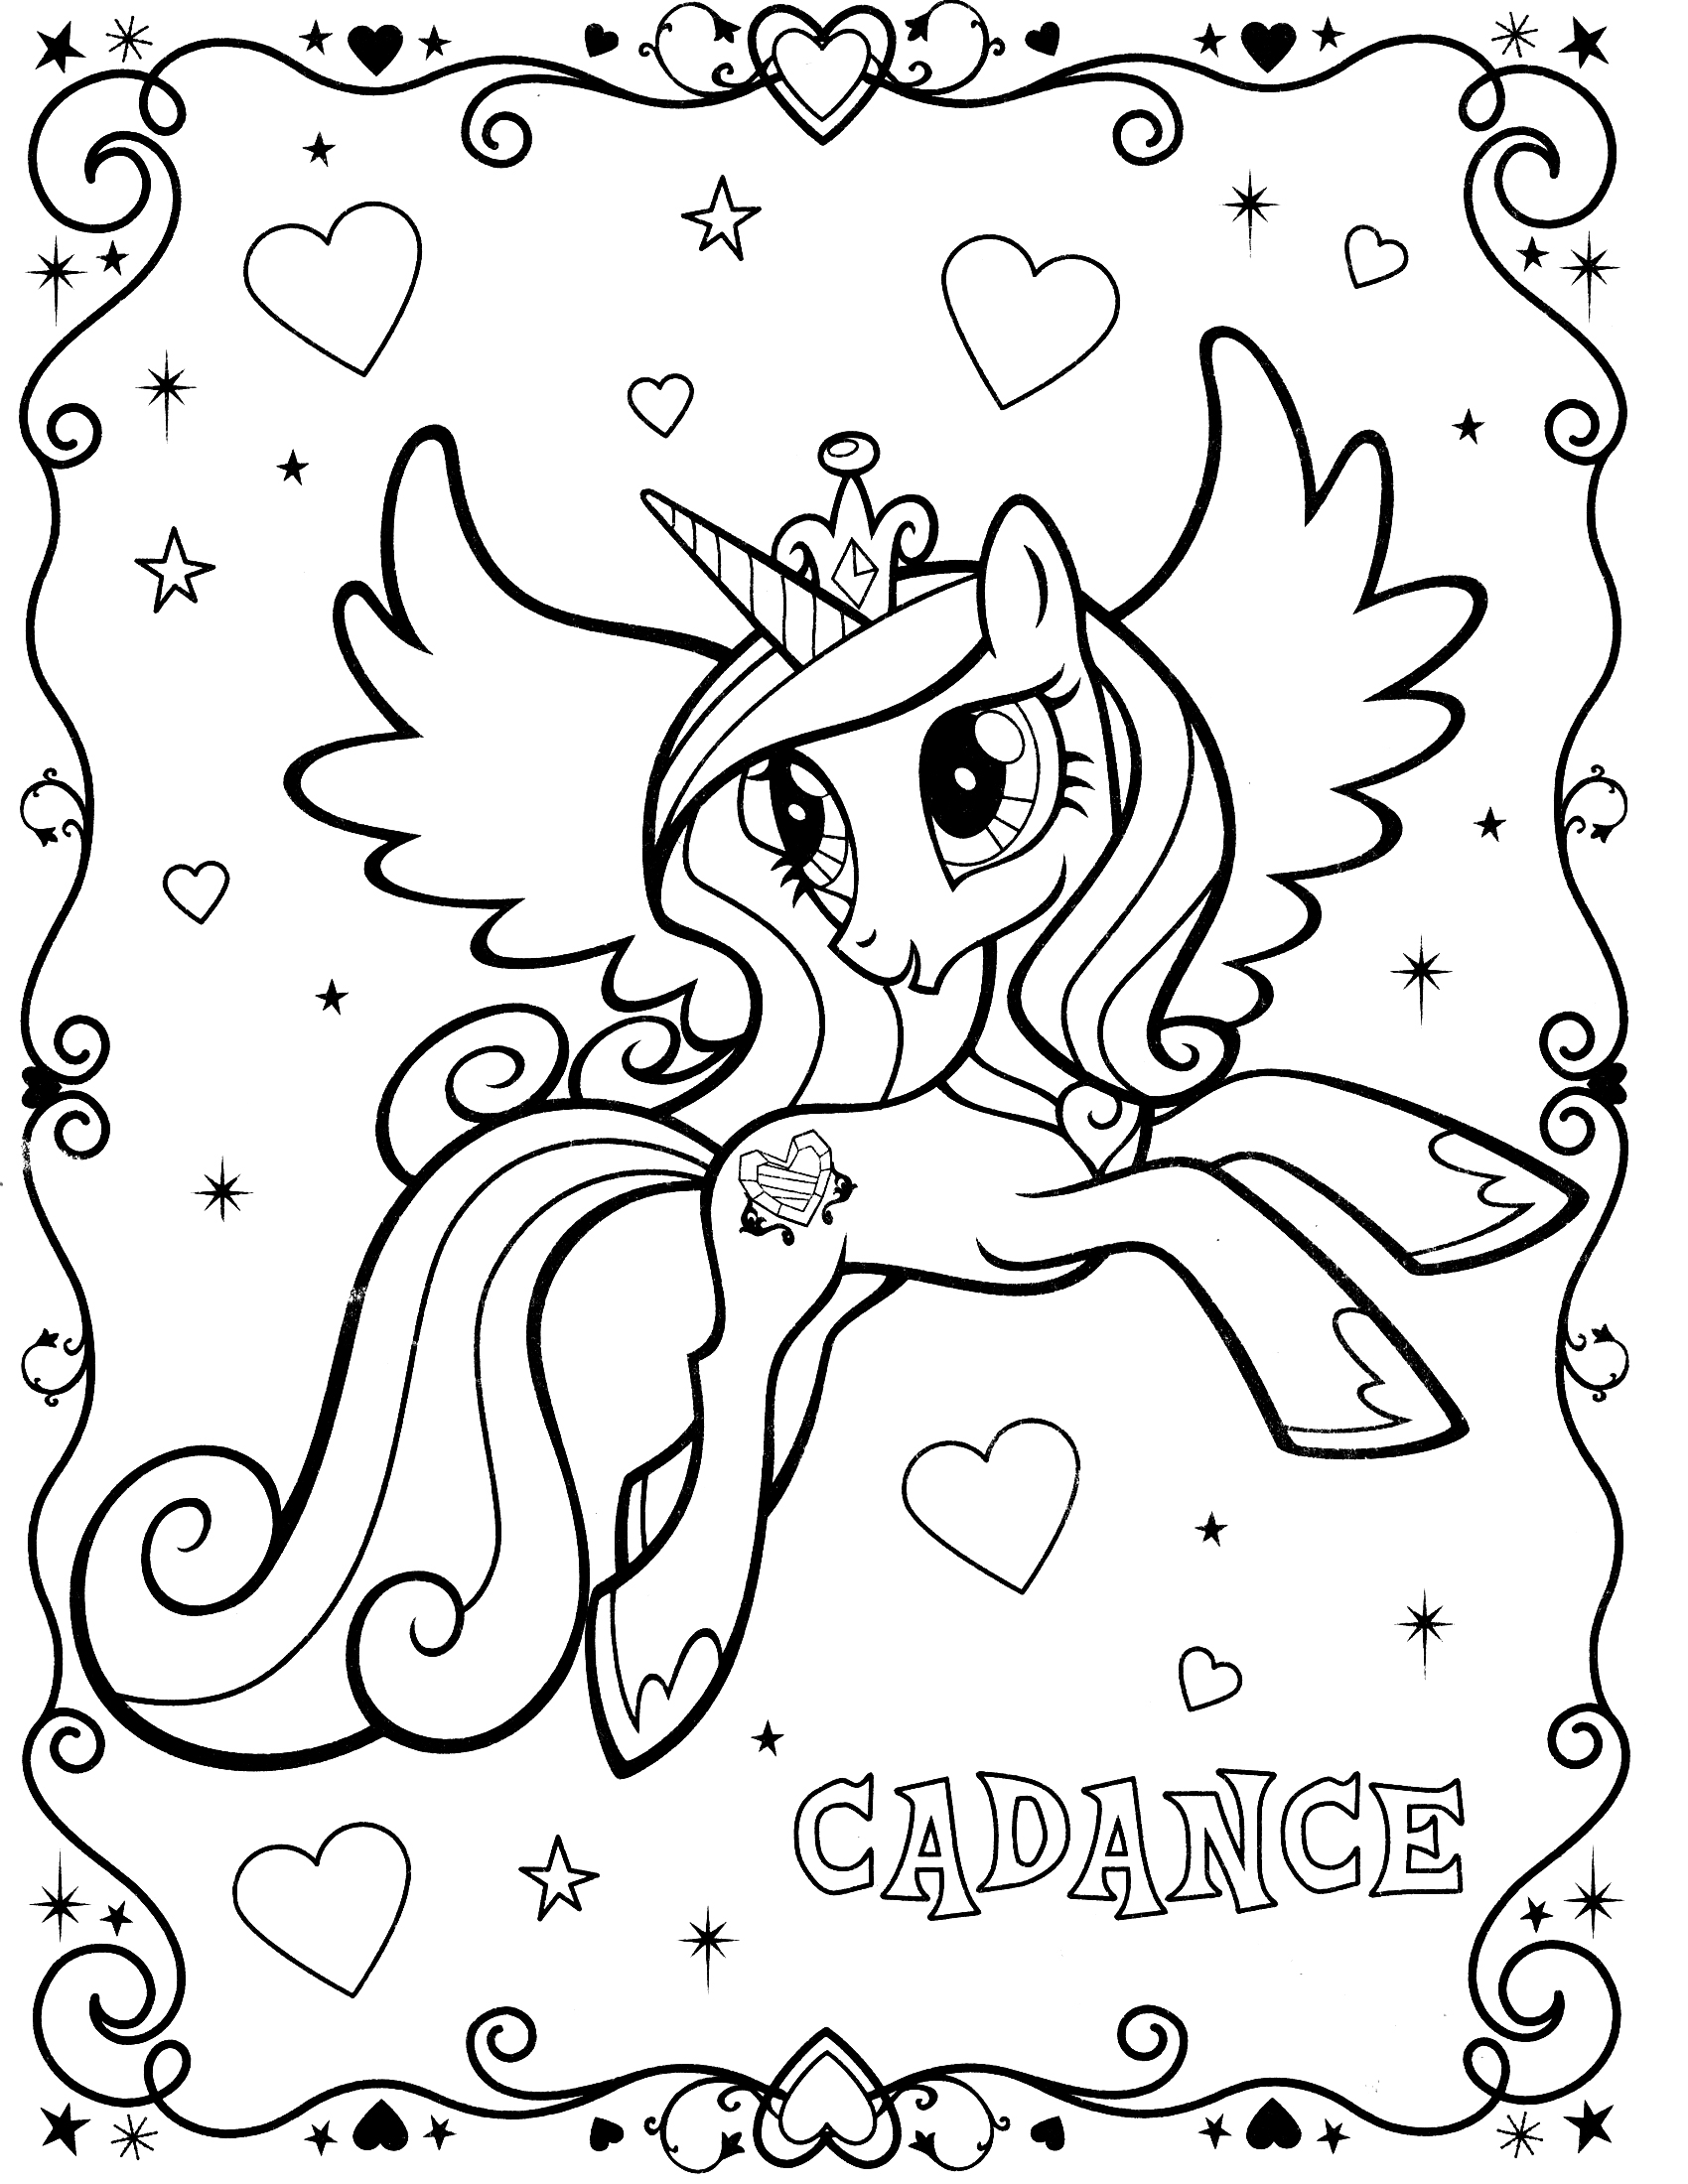 Drawing My Little Pony 20 Cartoons – Printable coloring pages